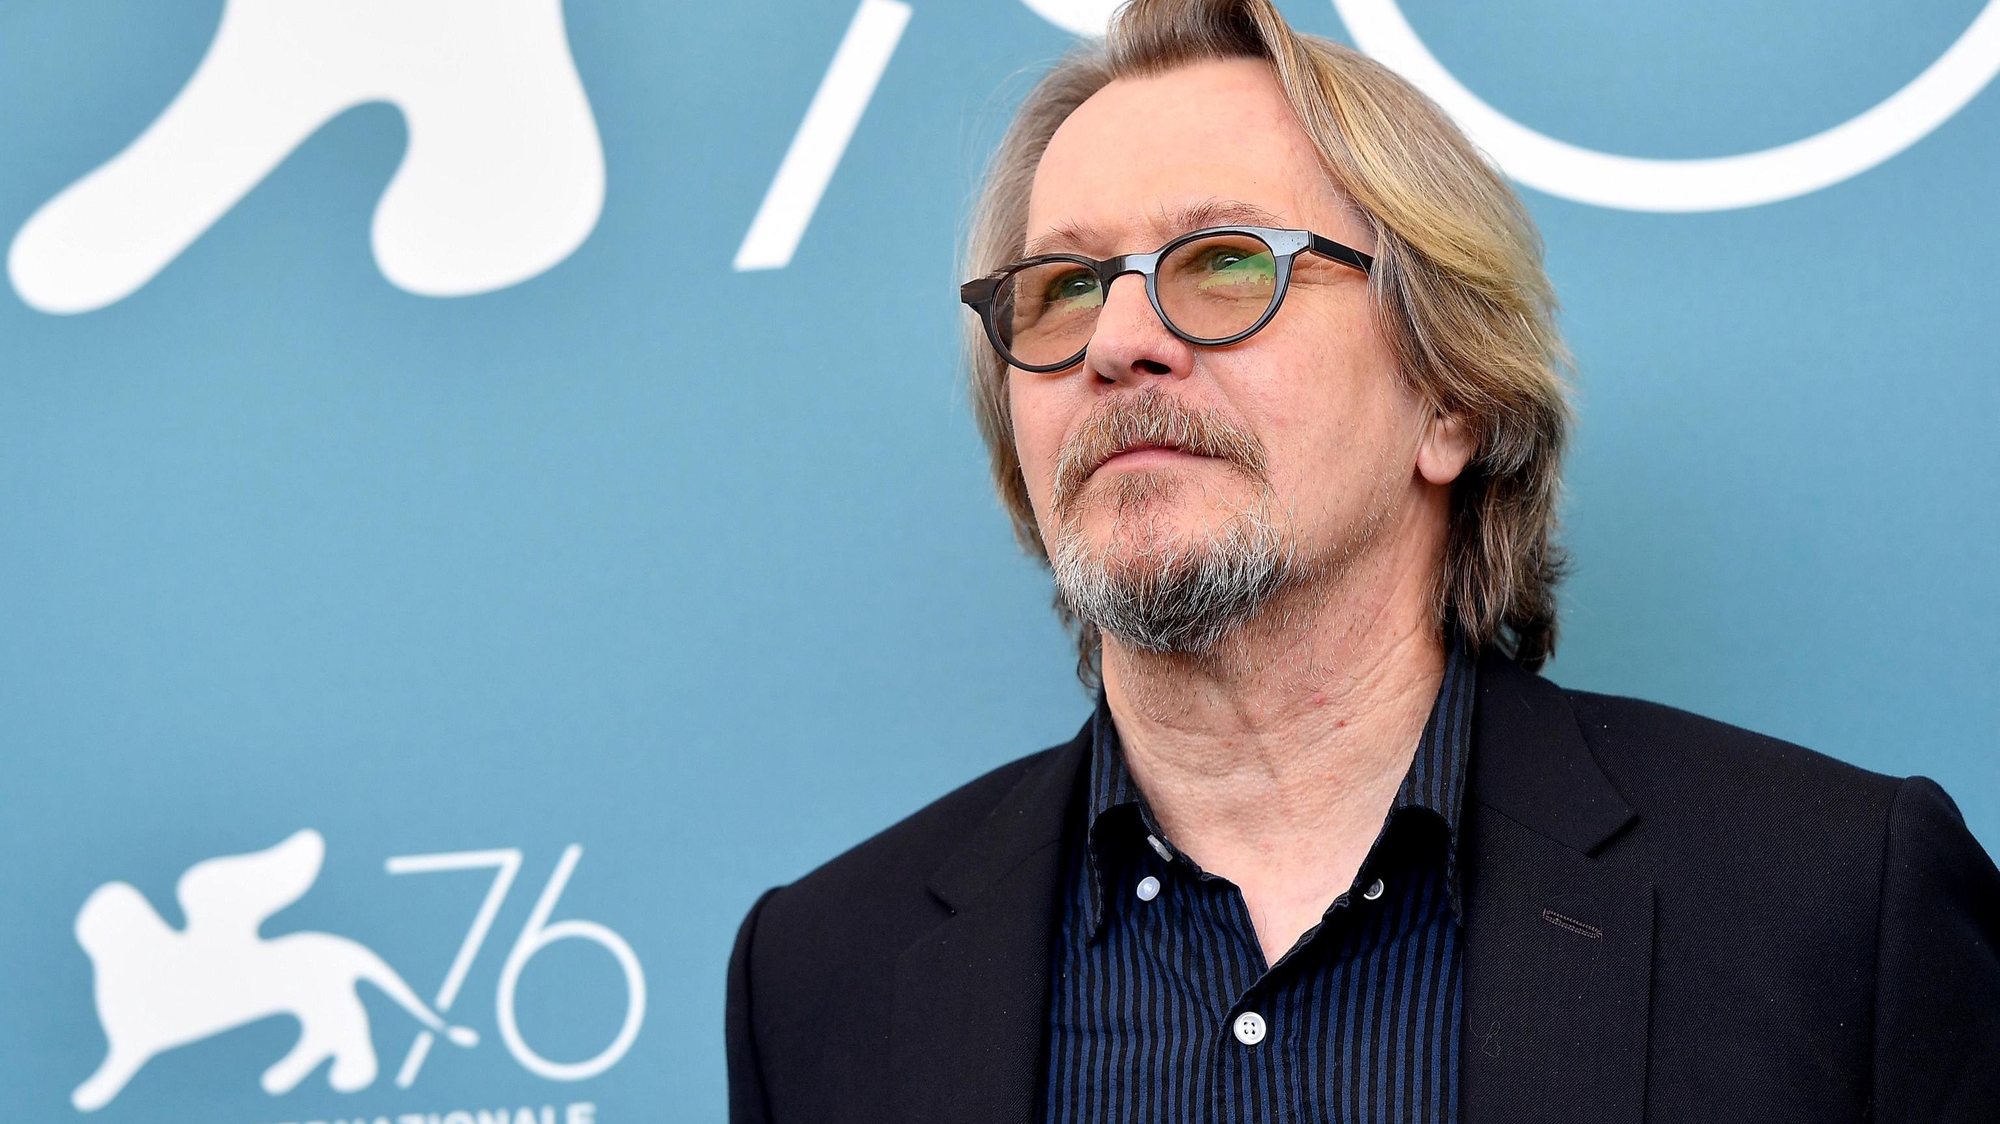 epa07809954 British actor Gary Oldman poses at a photocall for &#039;The Laundromat&#039; during the 76th annual Venice International Film Festival, in Venice, Italy, 01 September 2019. The movie is presented in official competition &#039;Venezia 76&#039; at the festival running from 28 August to 07 September.  EPA/ETTORE FERRARI